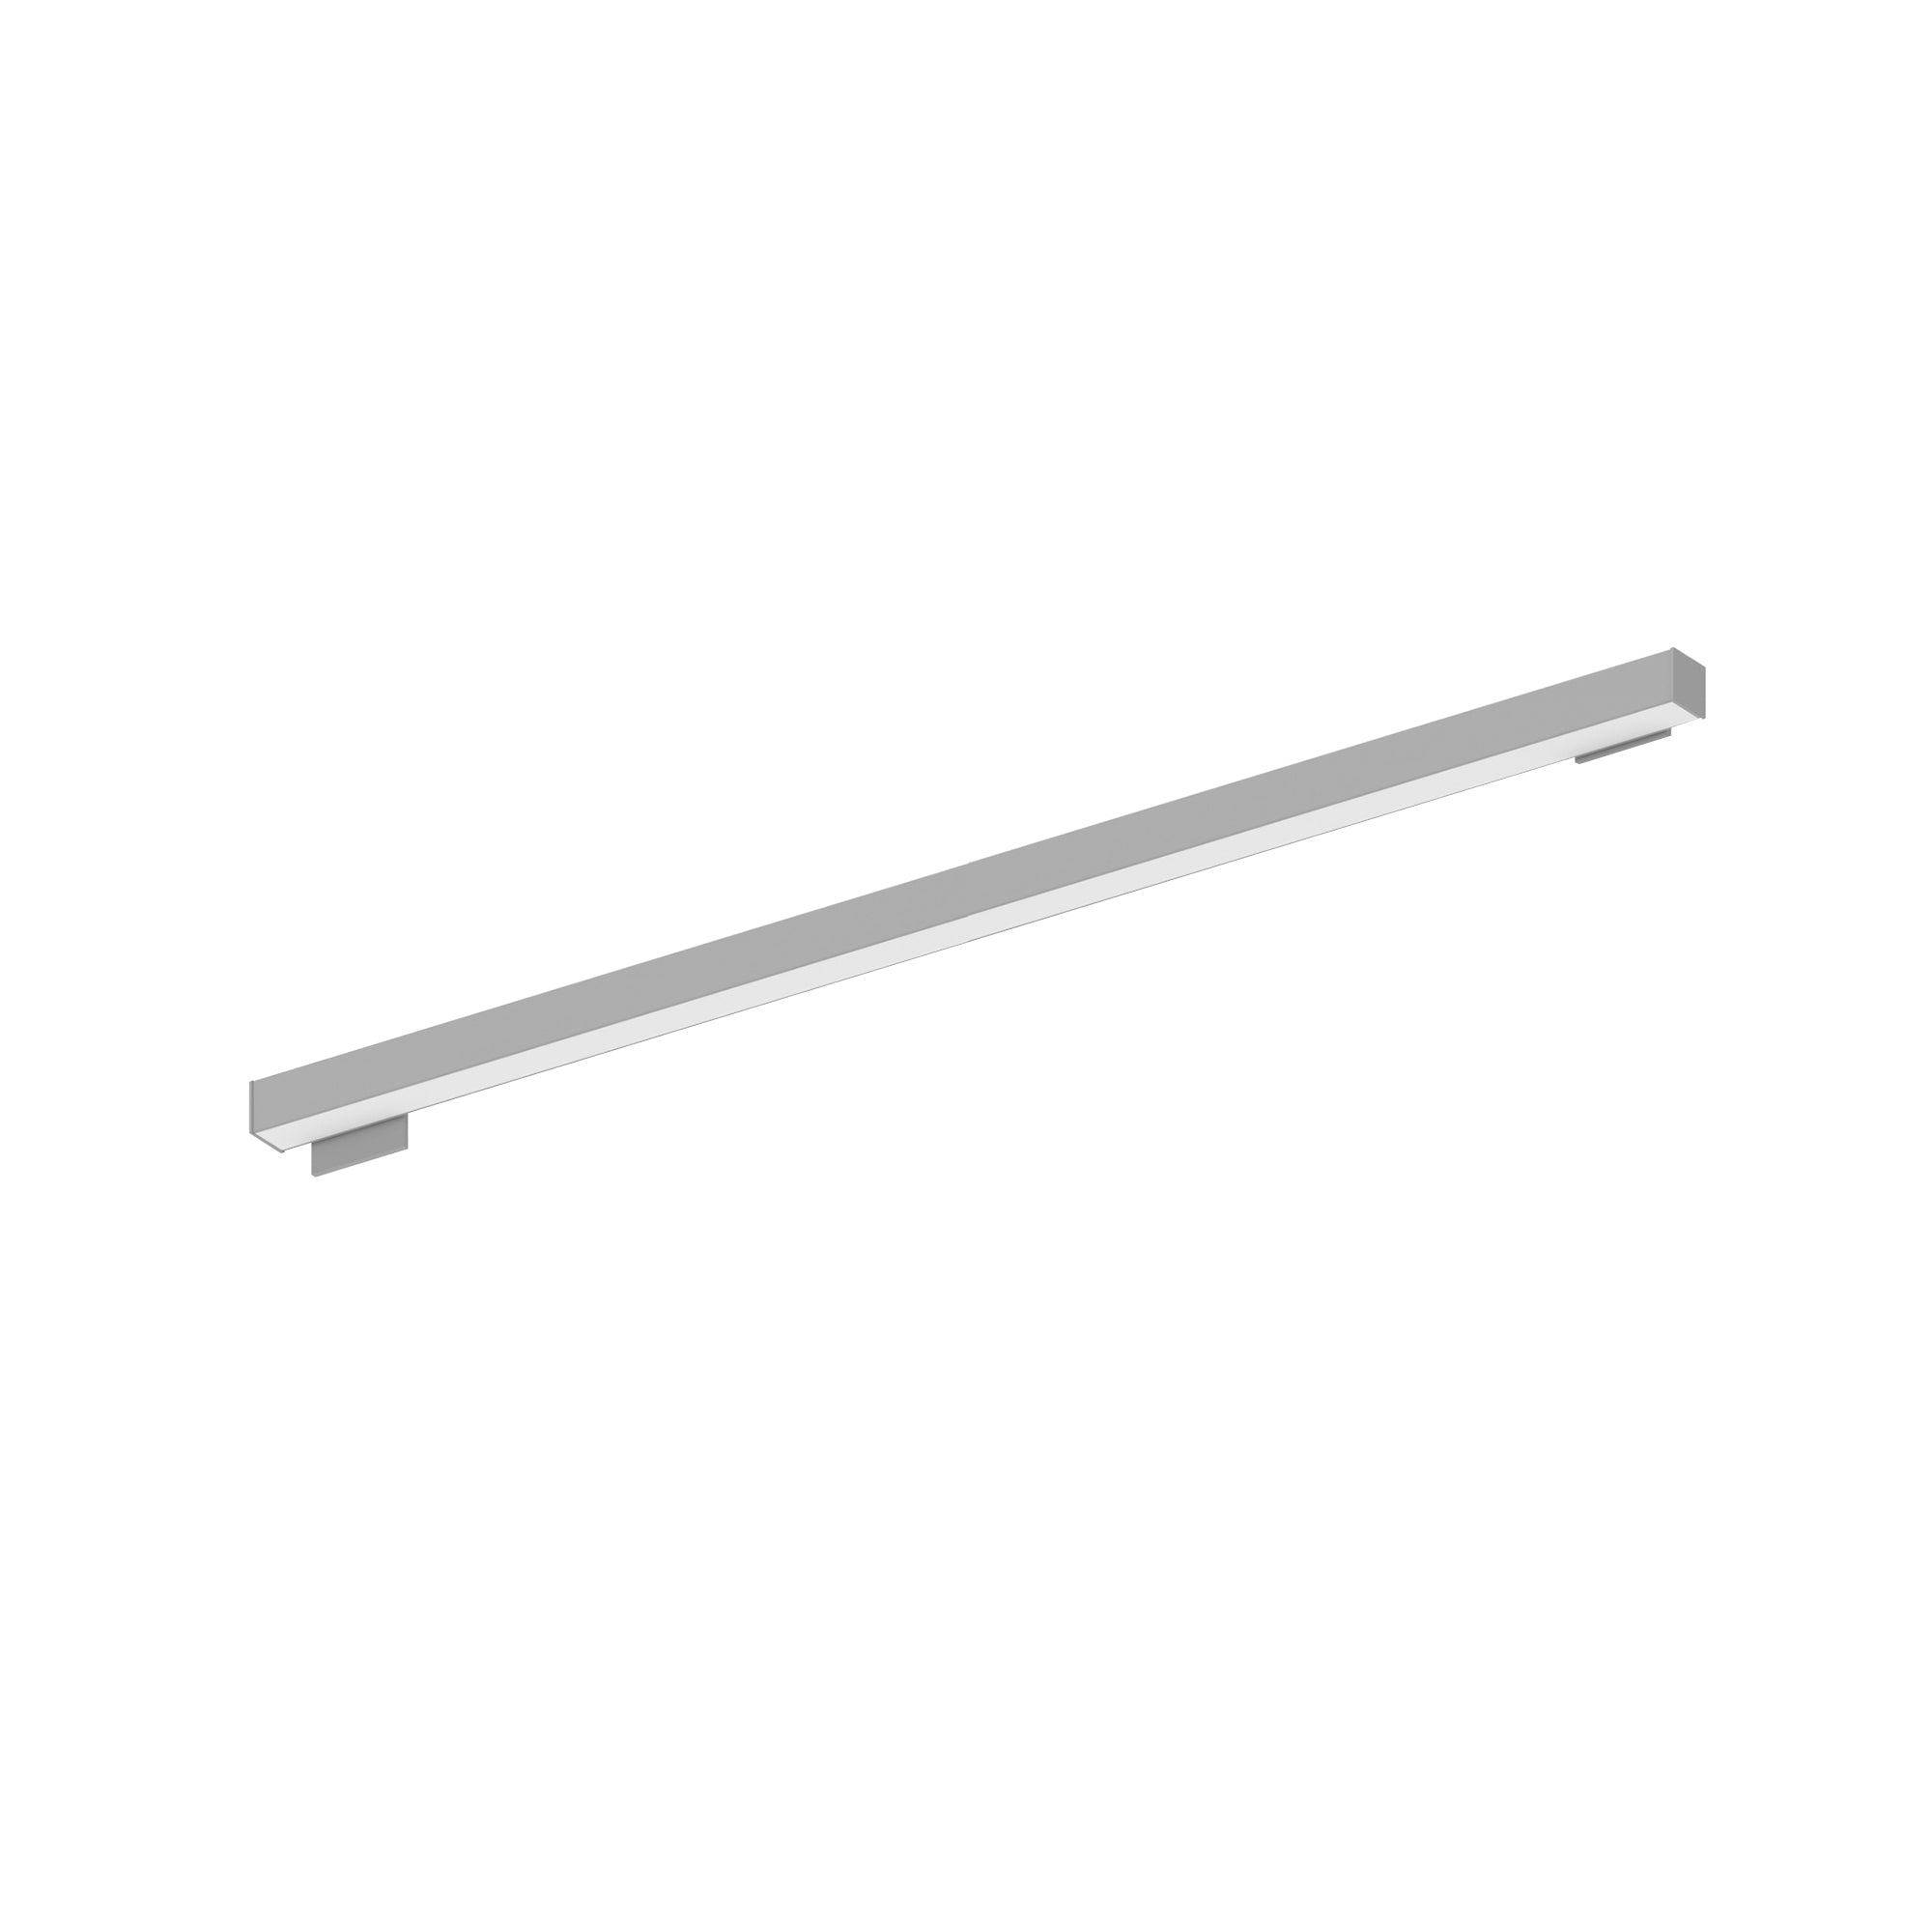 Nora Lighting NWLIN-81035A/L4-R2 - Linear - 8' L-Line LED Wall Mount Linear, 8400lm / 3500K, 4 Inchx4 Inch Left Plate & 2 Inchx4 Inch Right Plate, Aluminum Finish